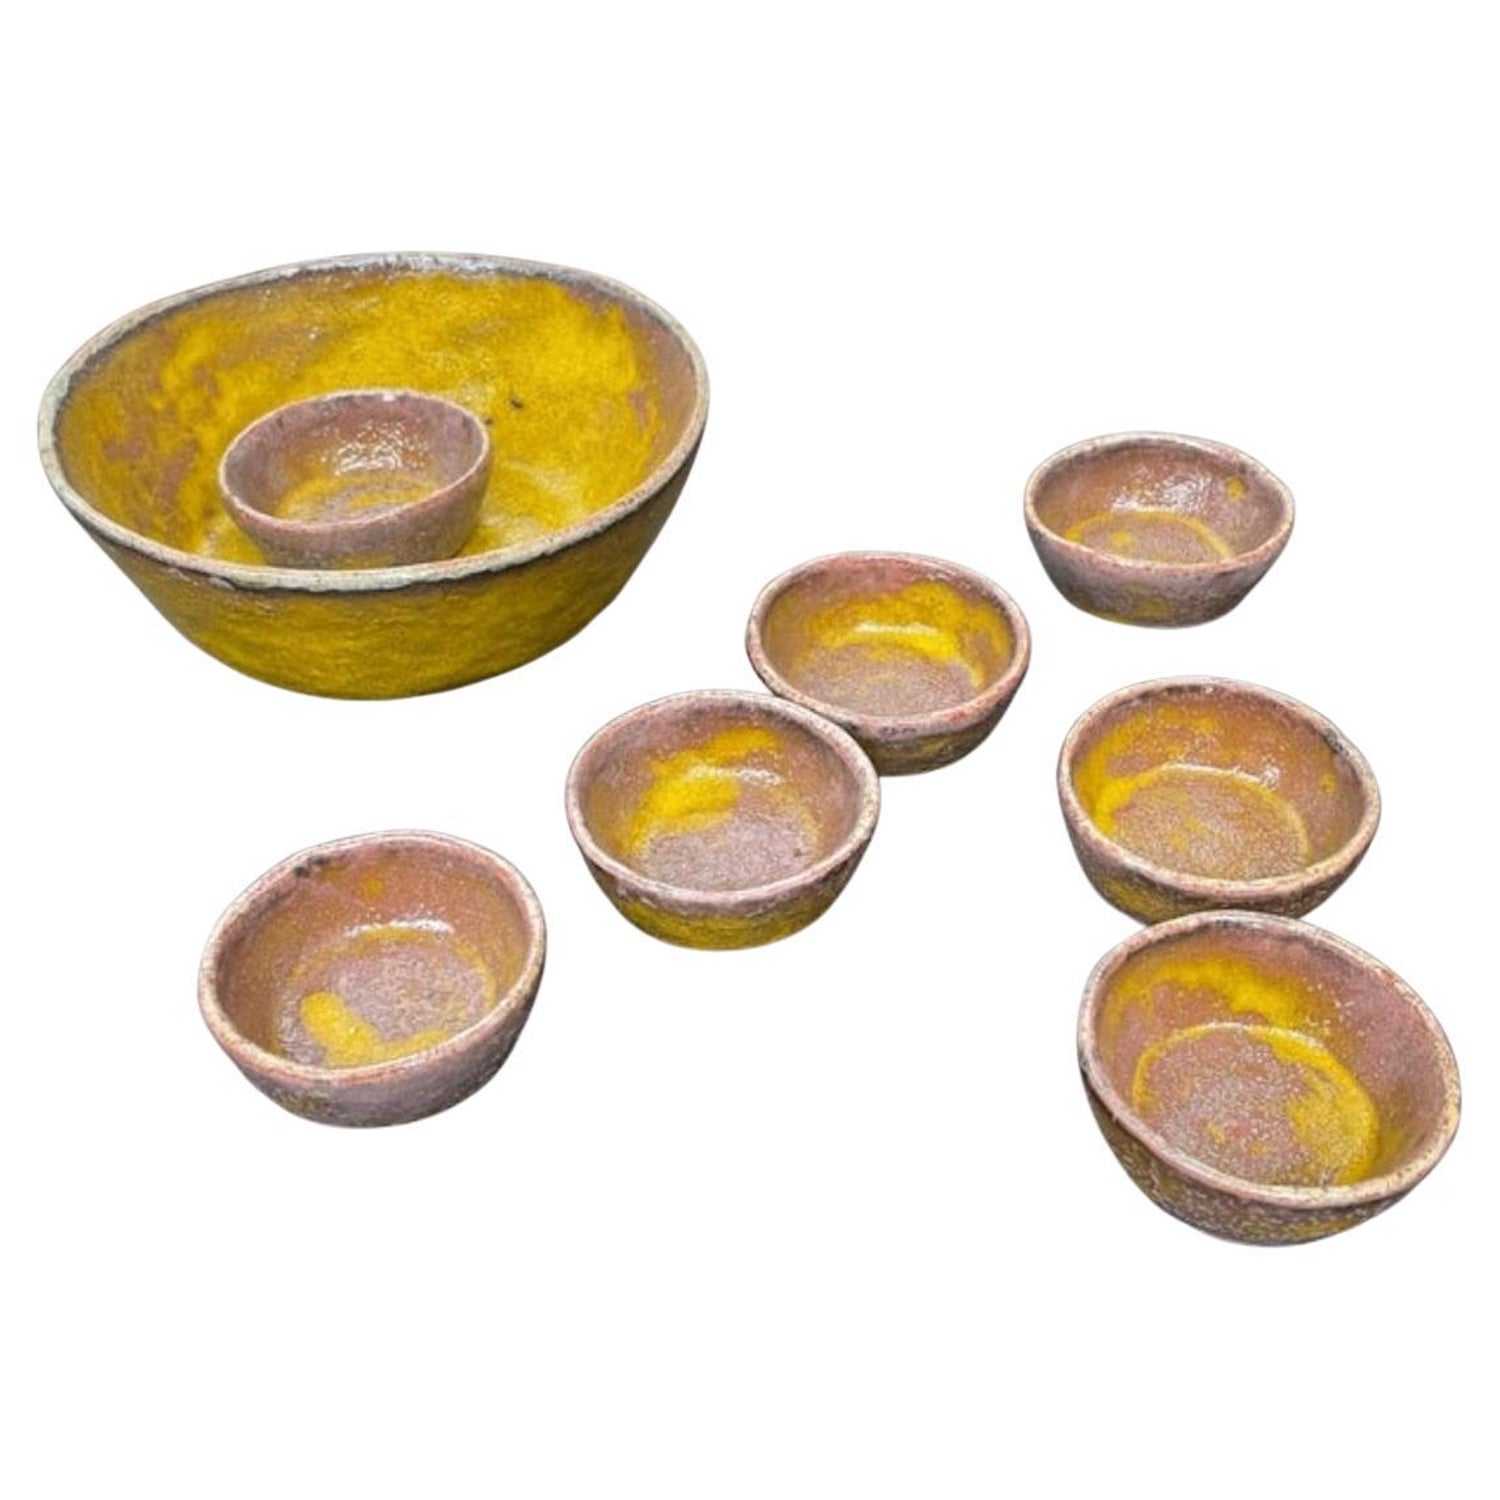 https://a.1stdibscdn.com/colorful-set-of-mid-century-pottery-bowls-for-sale/f_58922/f_350910921688582925179/f_35091092_1688582925492_bg_processed.jpg?width=1500